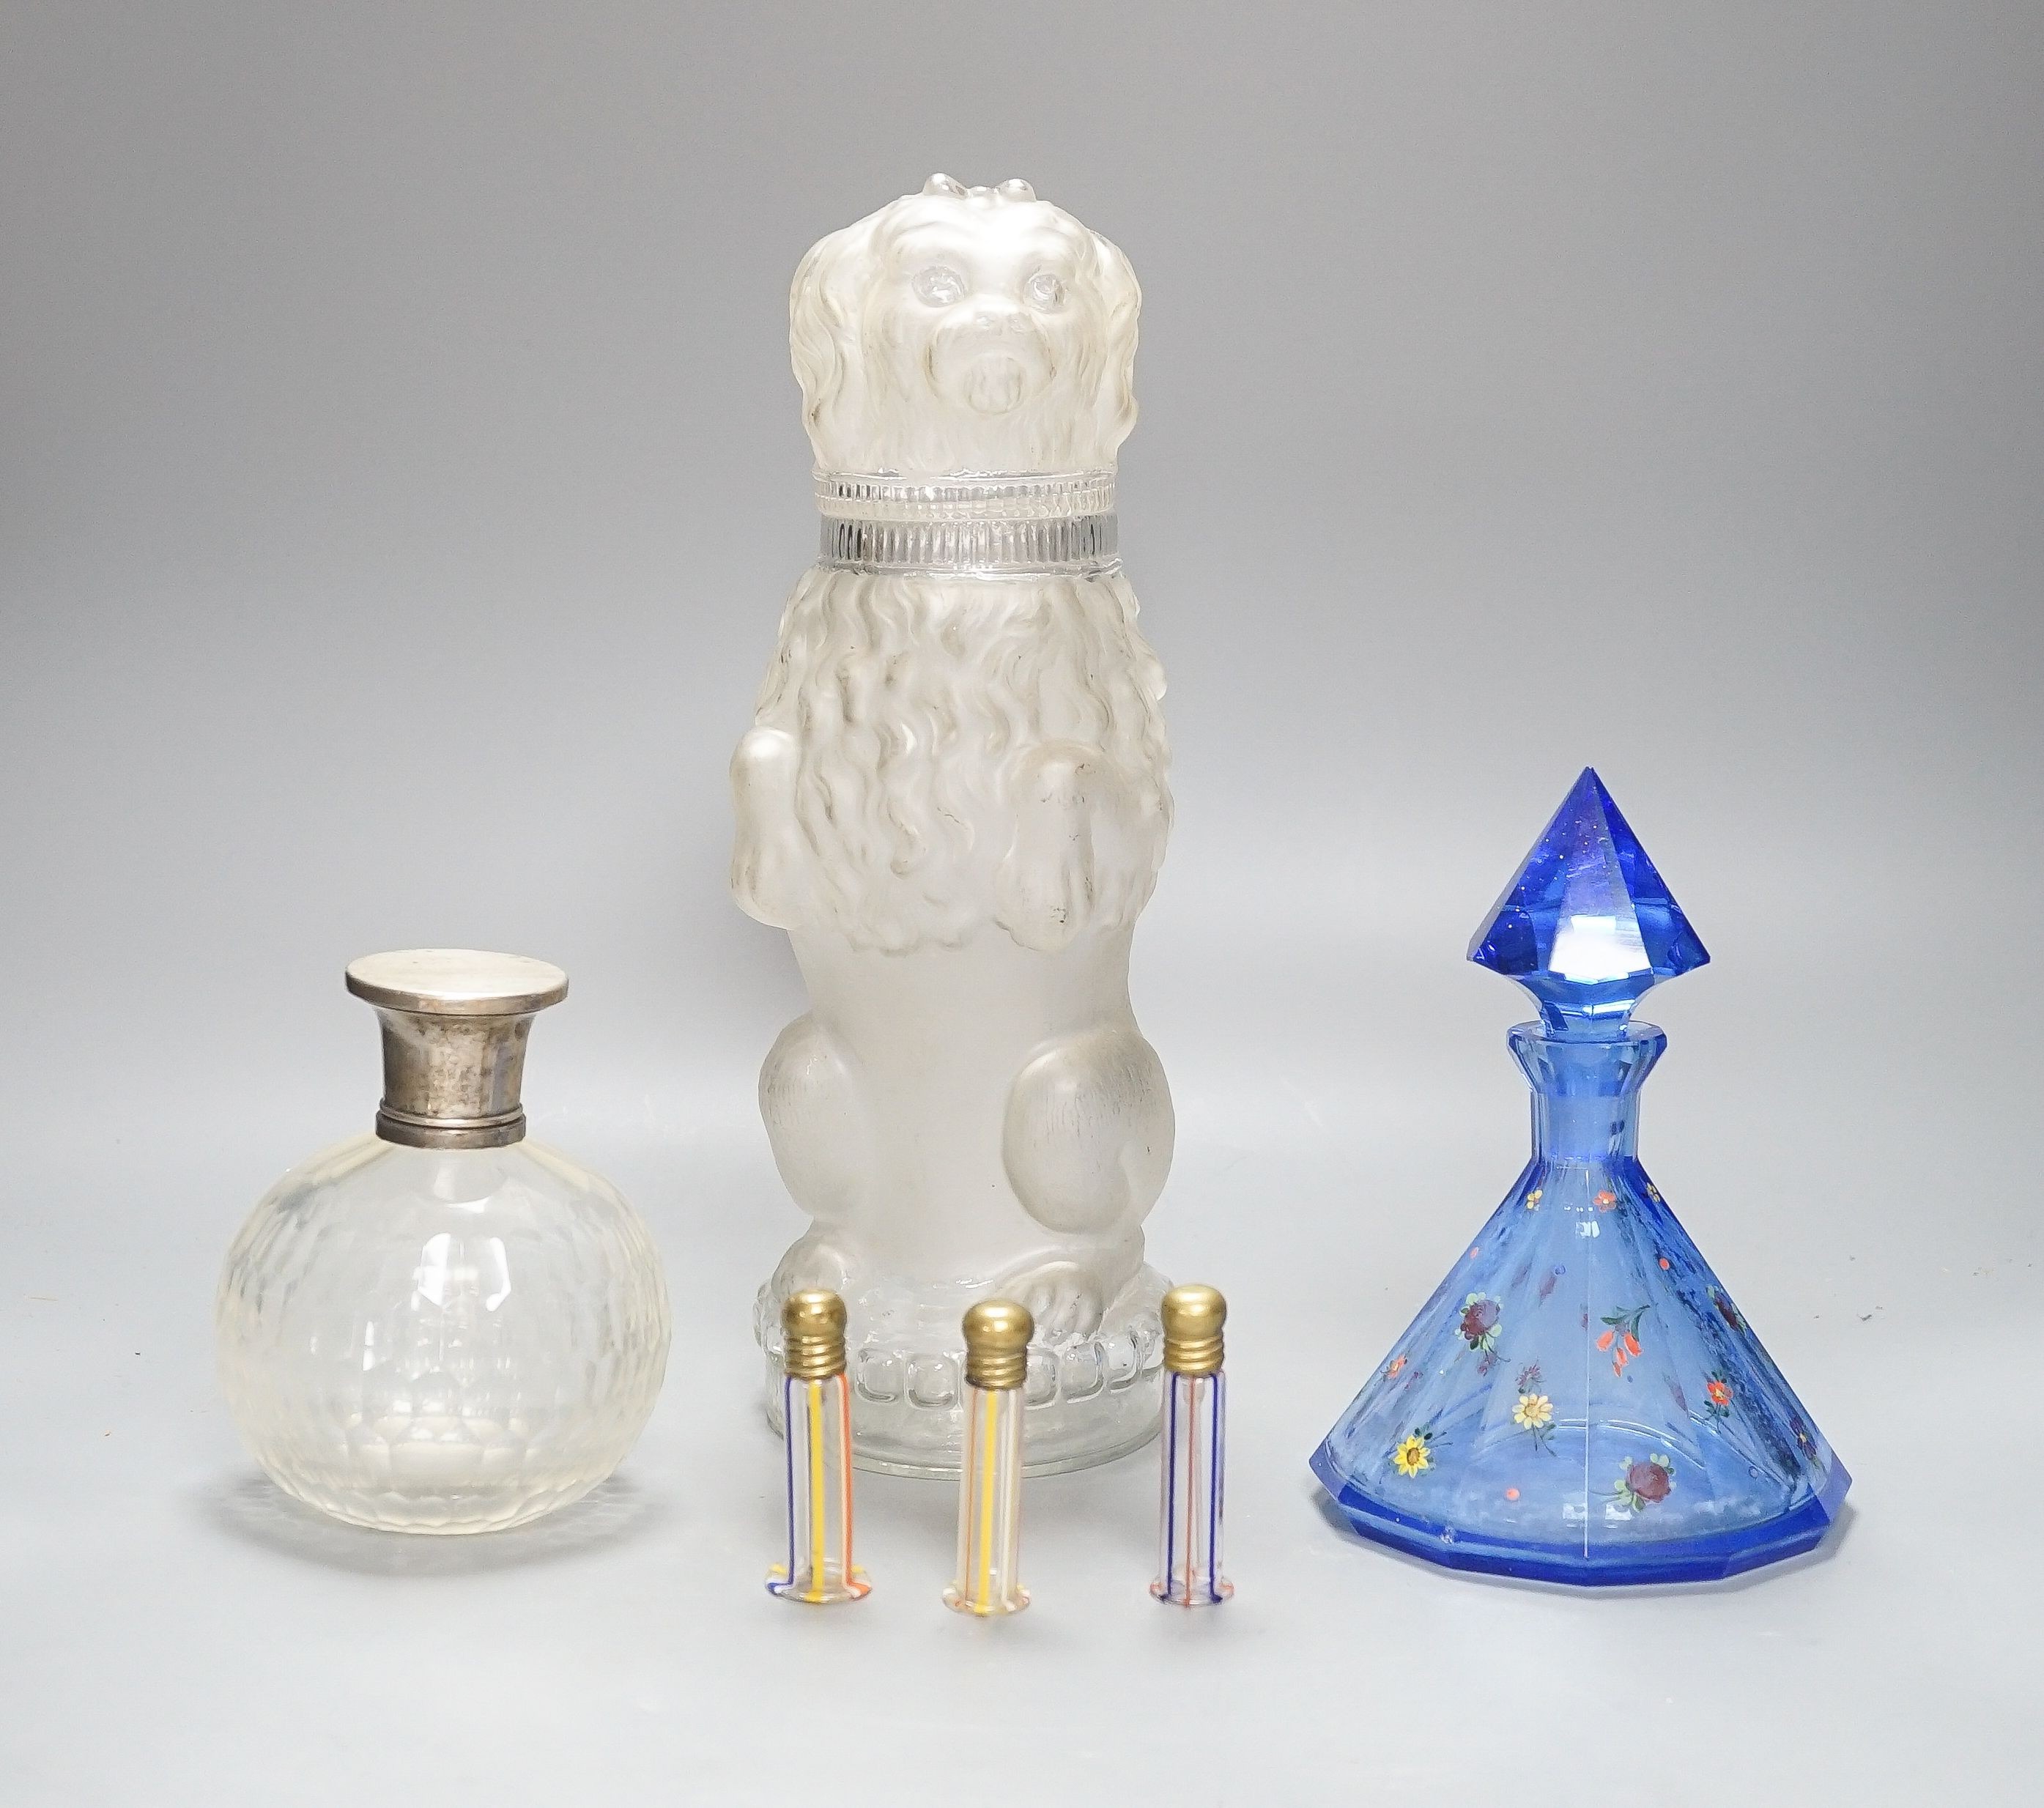 An American novelty dog decanter, silver topped perfume bottle, blue perfume bottle and three candy stripe bottles 32cm